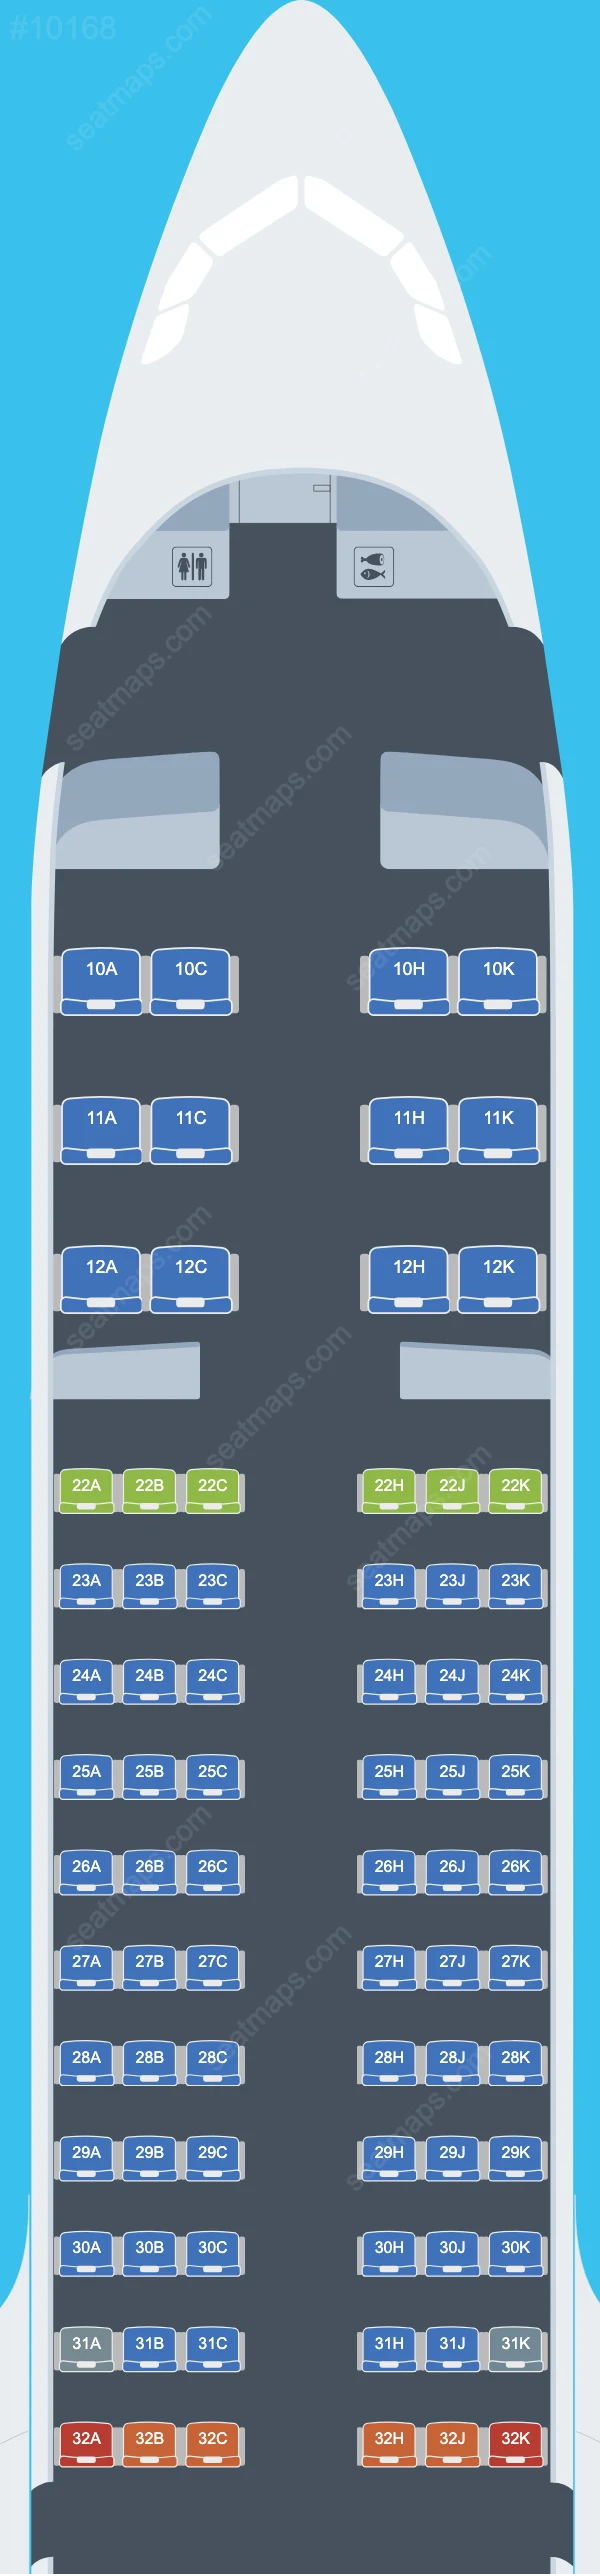 Cathay Pacific Airbus A321-200neo seatmap preview